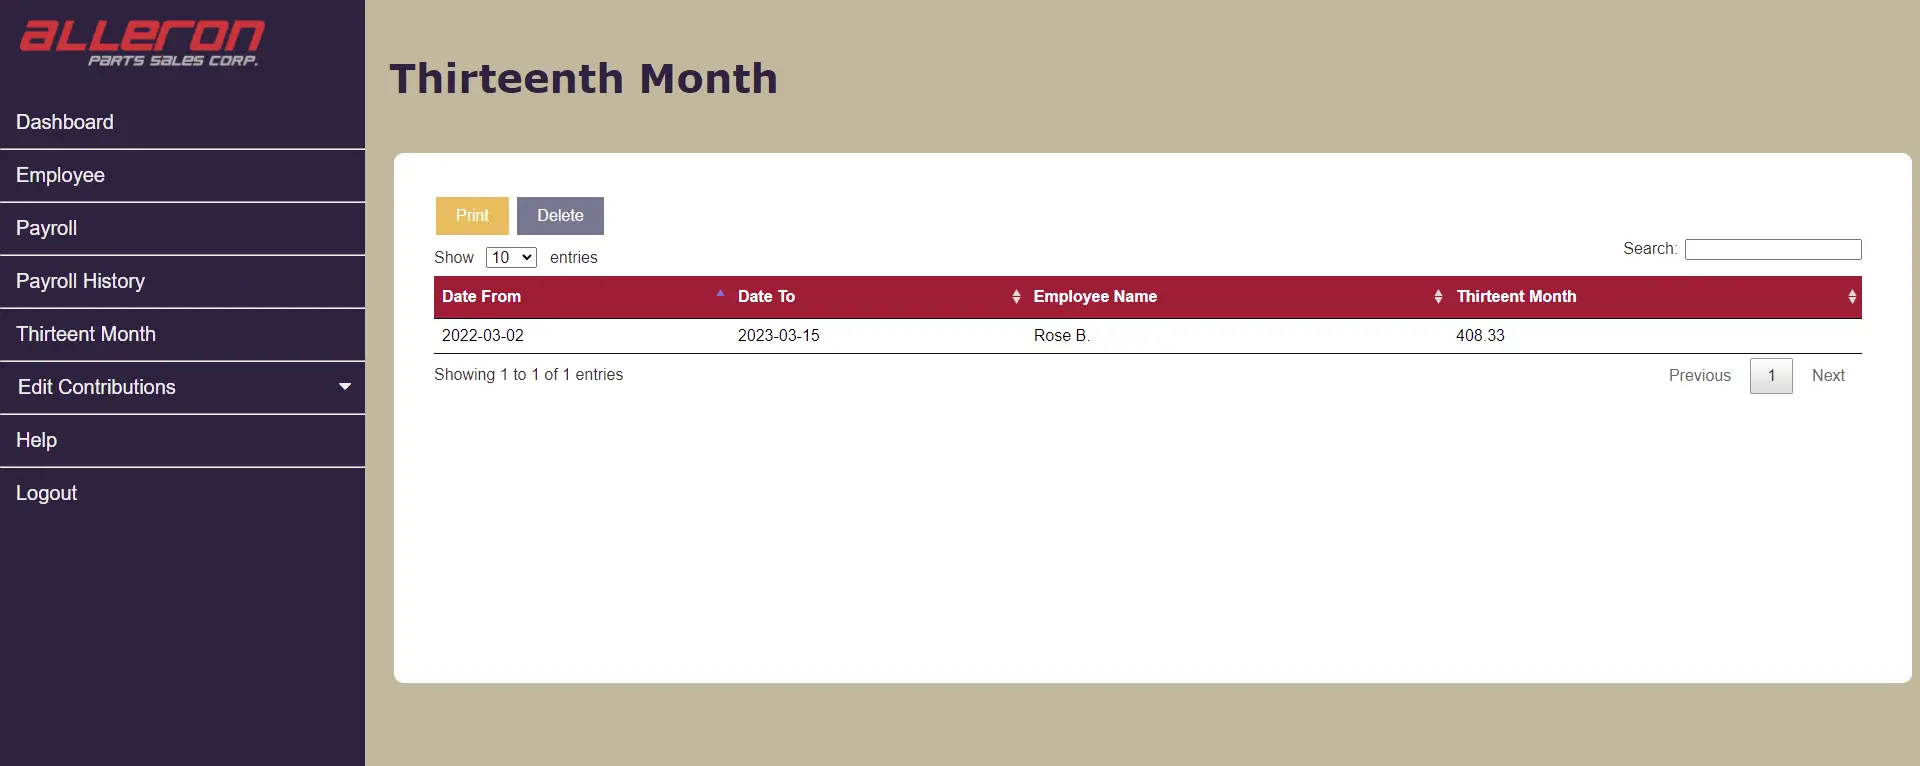 Payroll System in PHP - Thirteenth Month